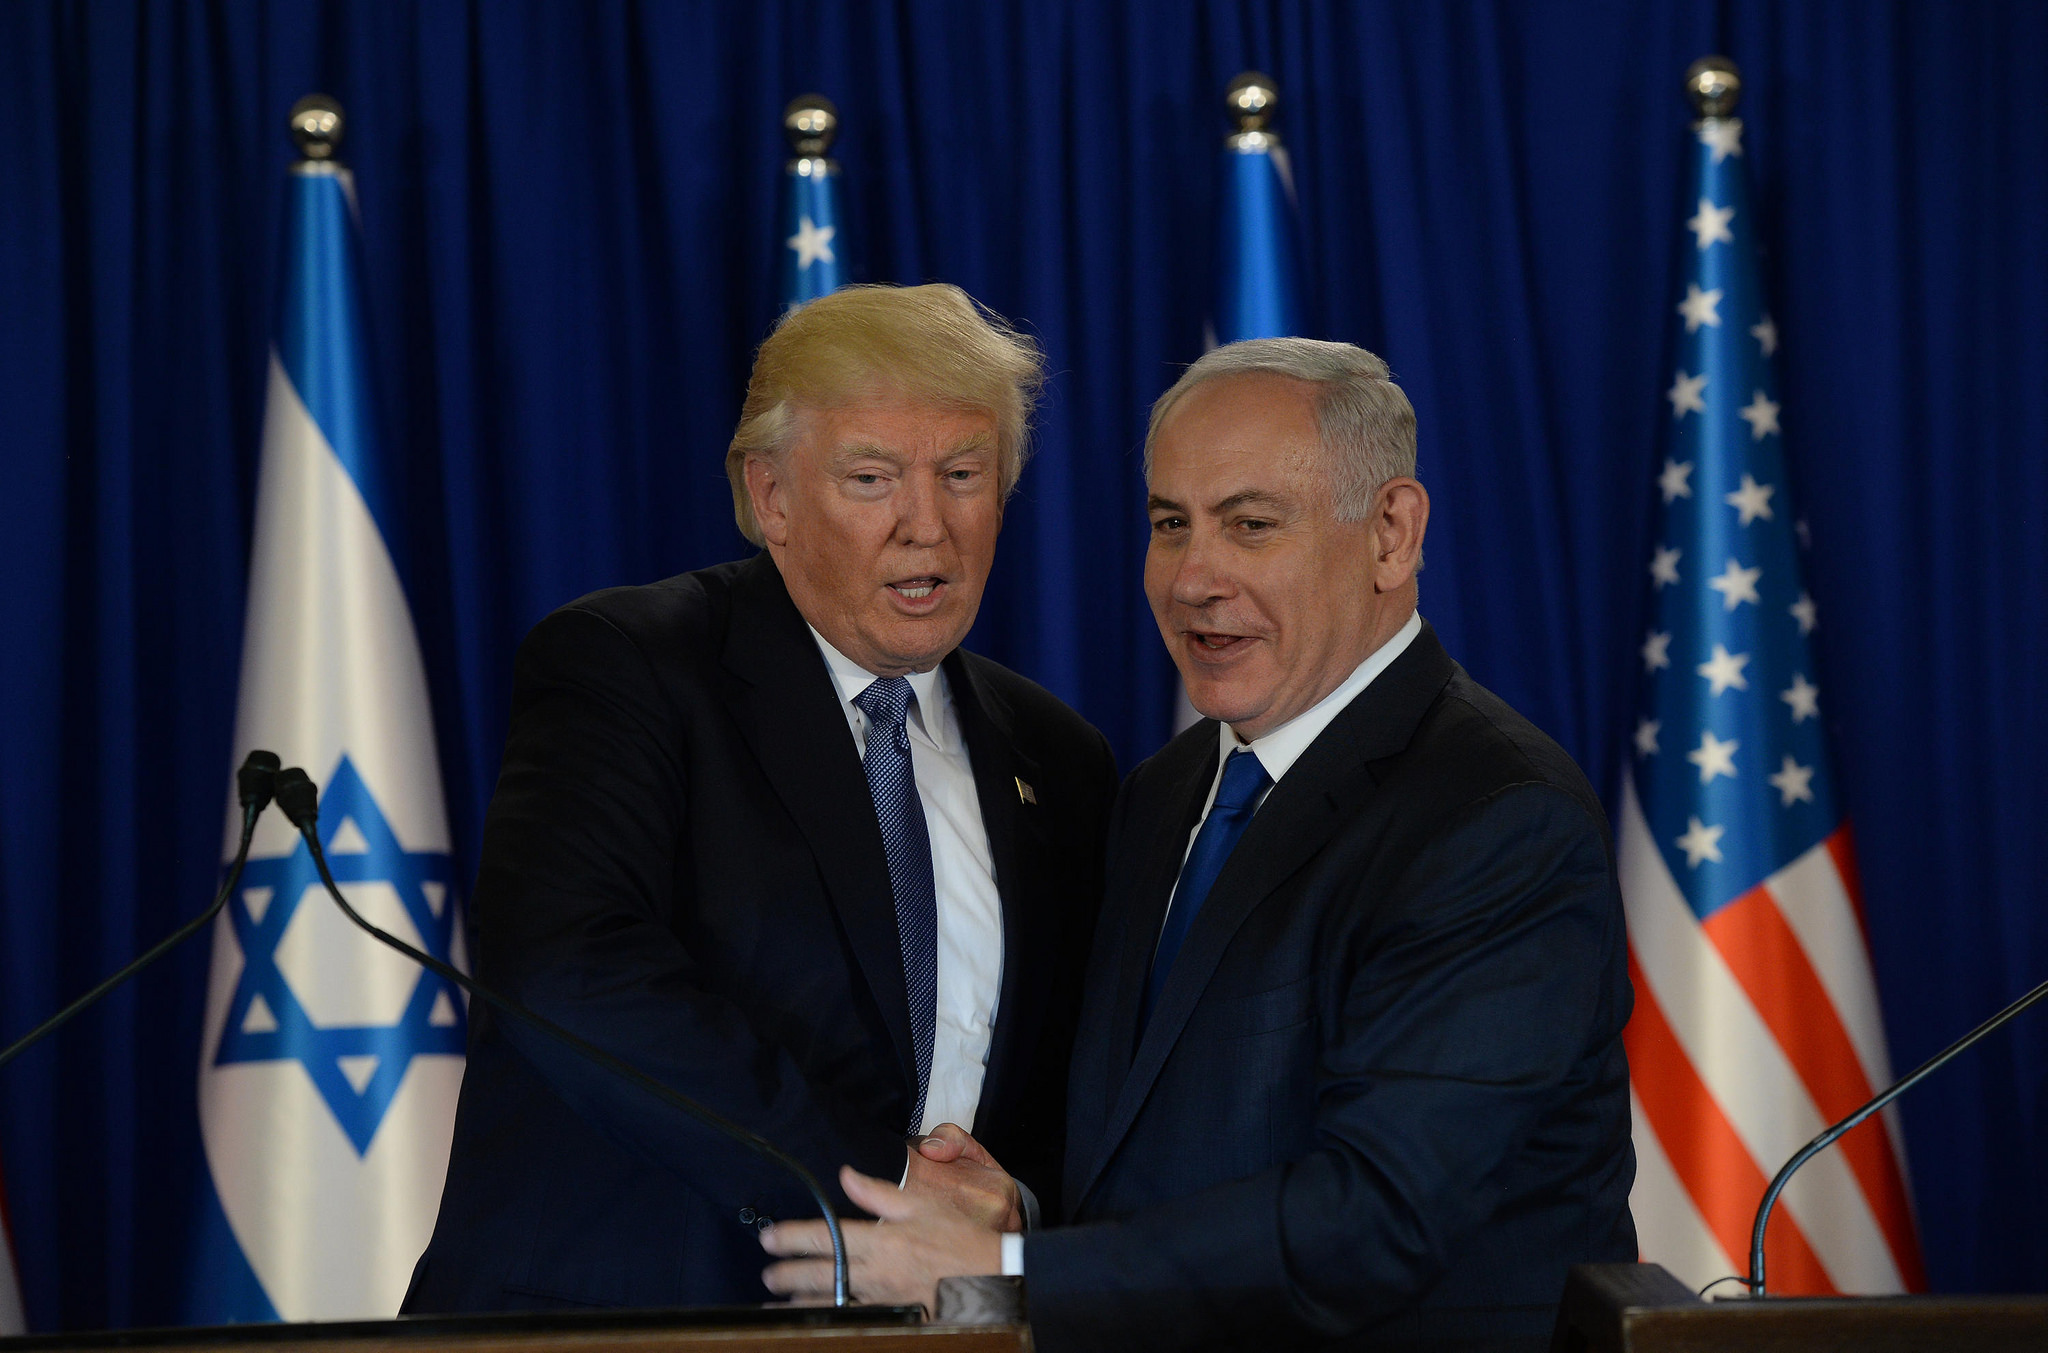 President Donald Trump and Prime Minister Benjamin Netanyahu (Photo: Israel Ministry of Foreign Affairs)